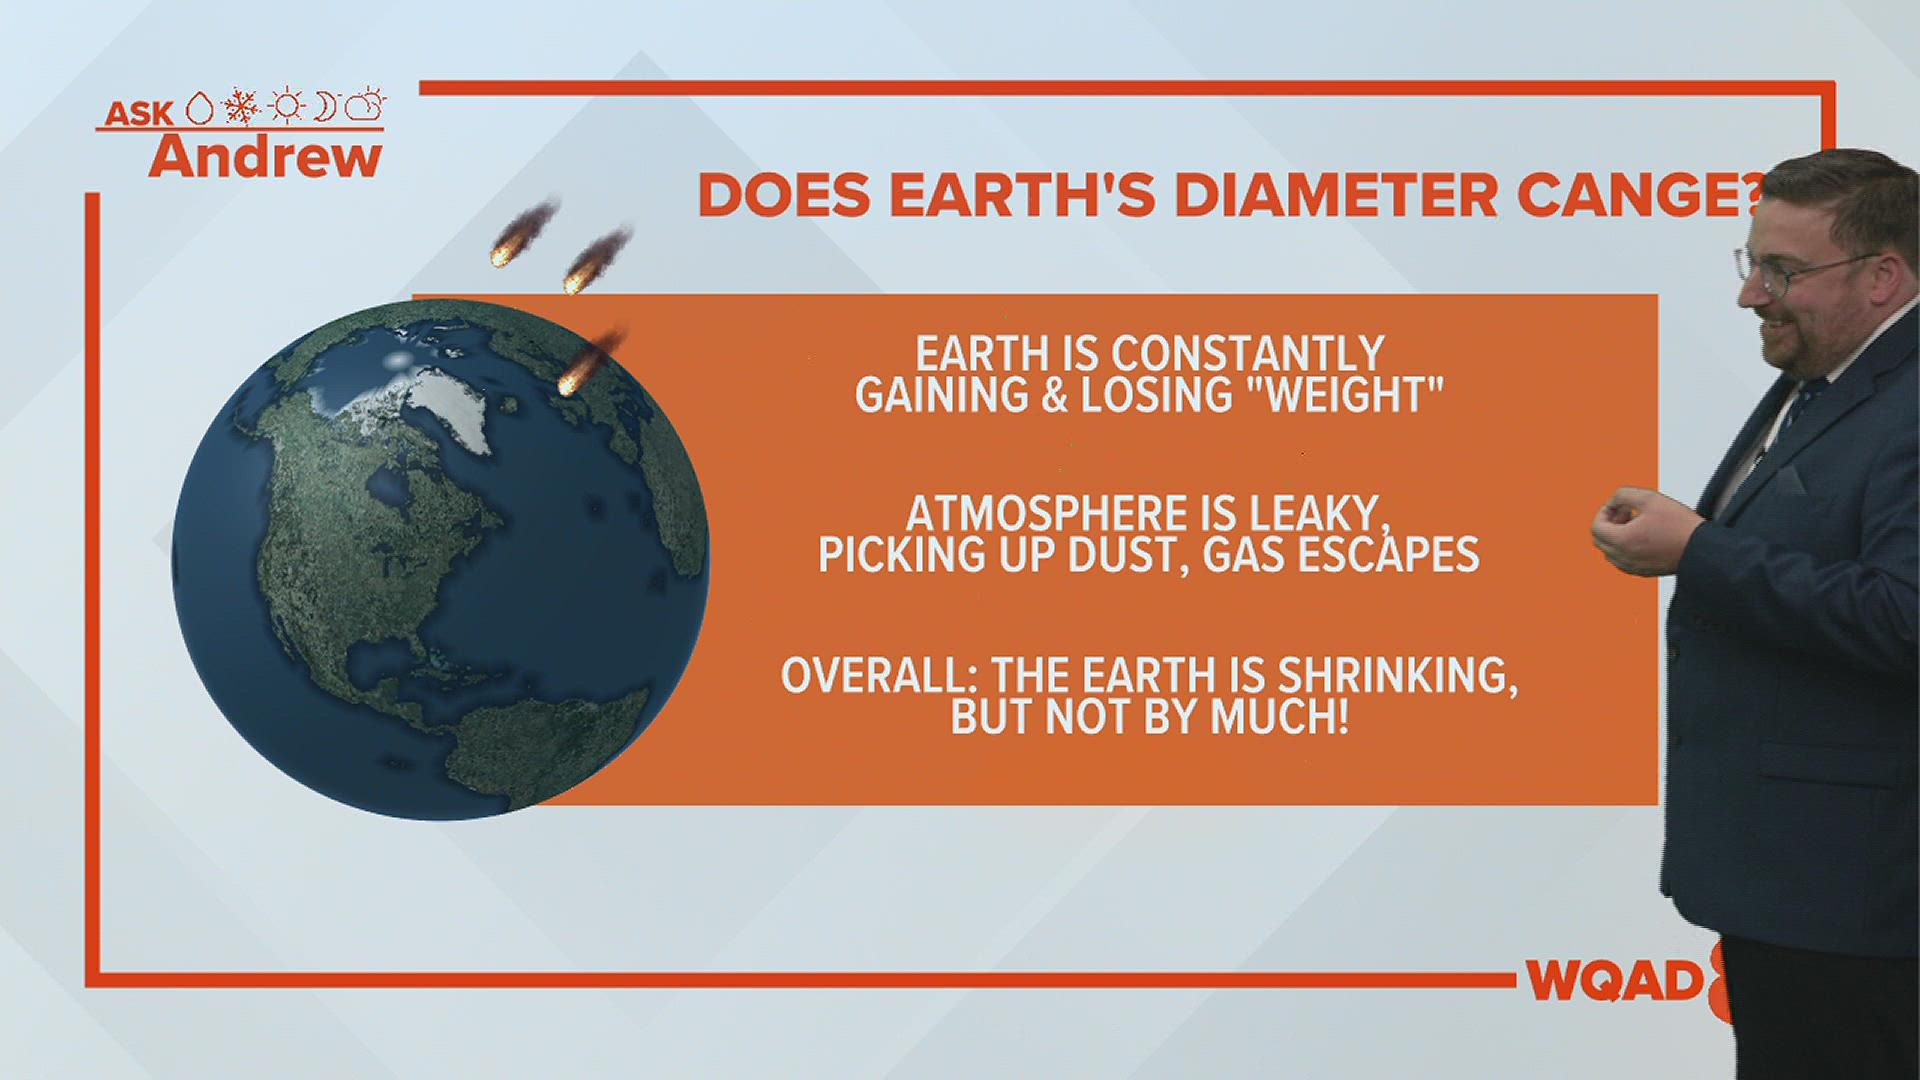 Falling leaves, snow, and more buildings. Does that mean the Earth's diameter is expanding?